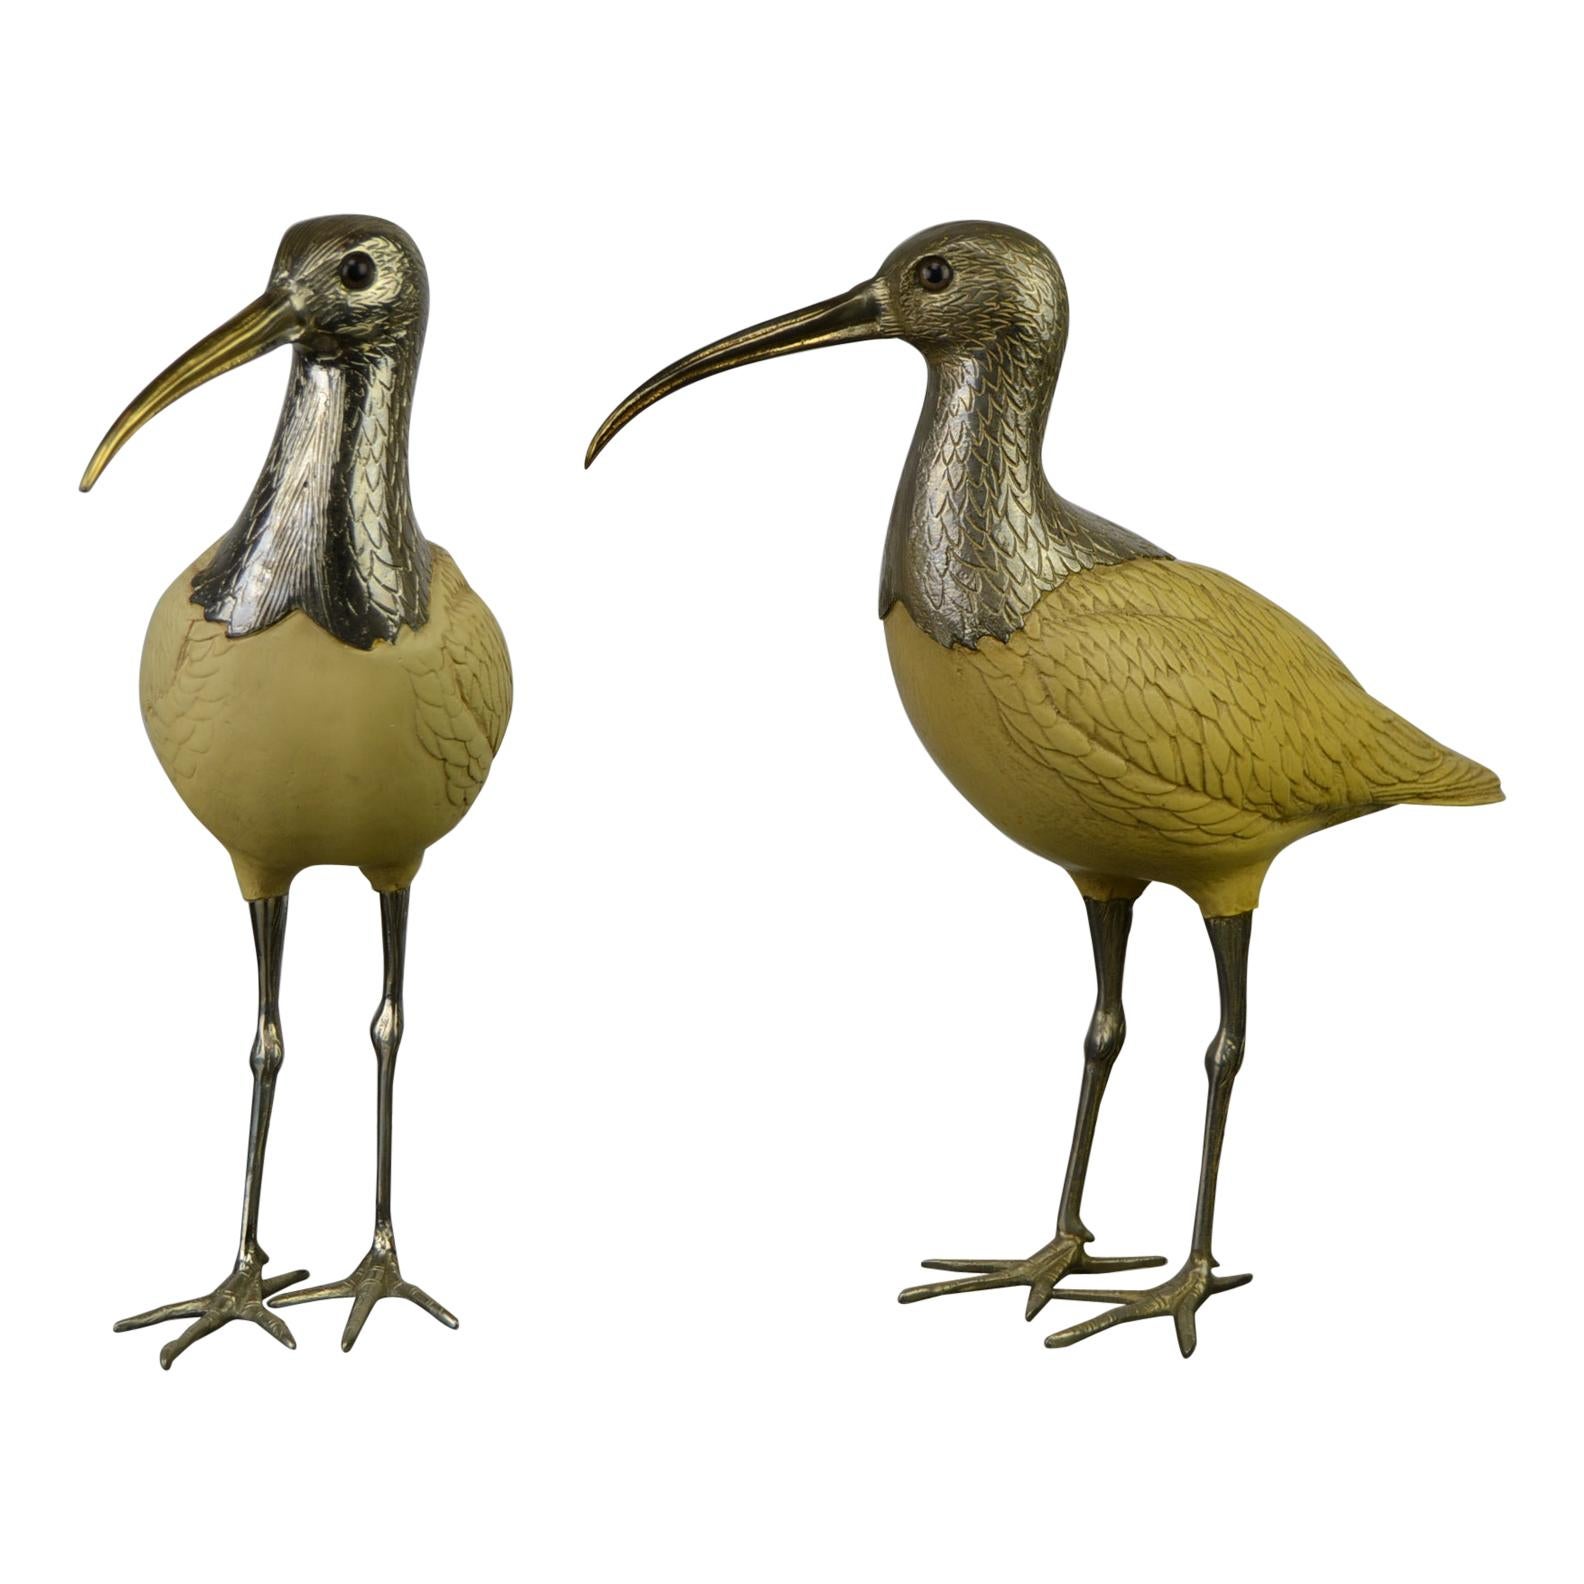 Ibis Bird Sculptures, Malevolti Italy, Silvered Metal and Resin, 1950s